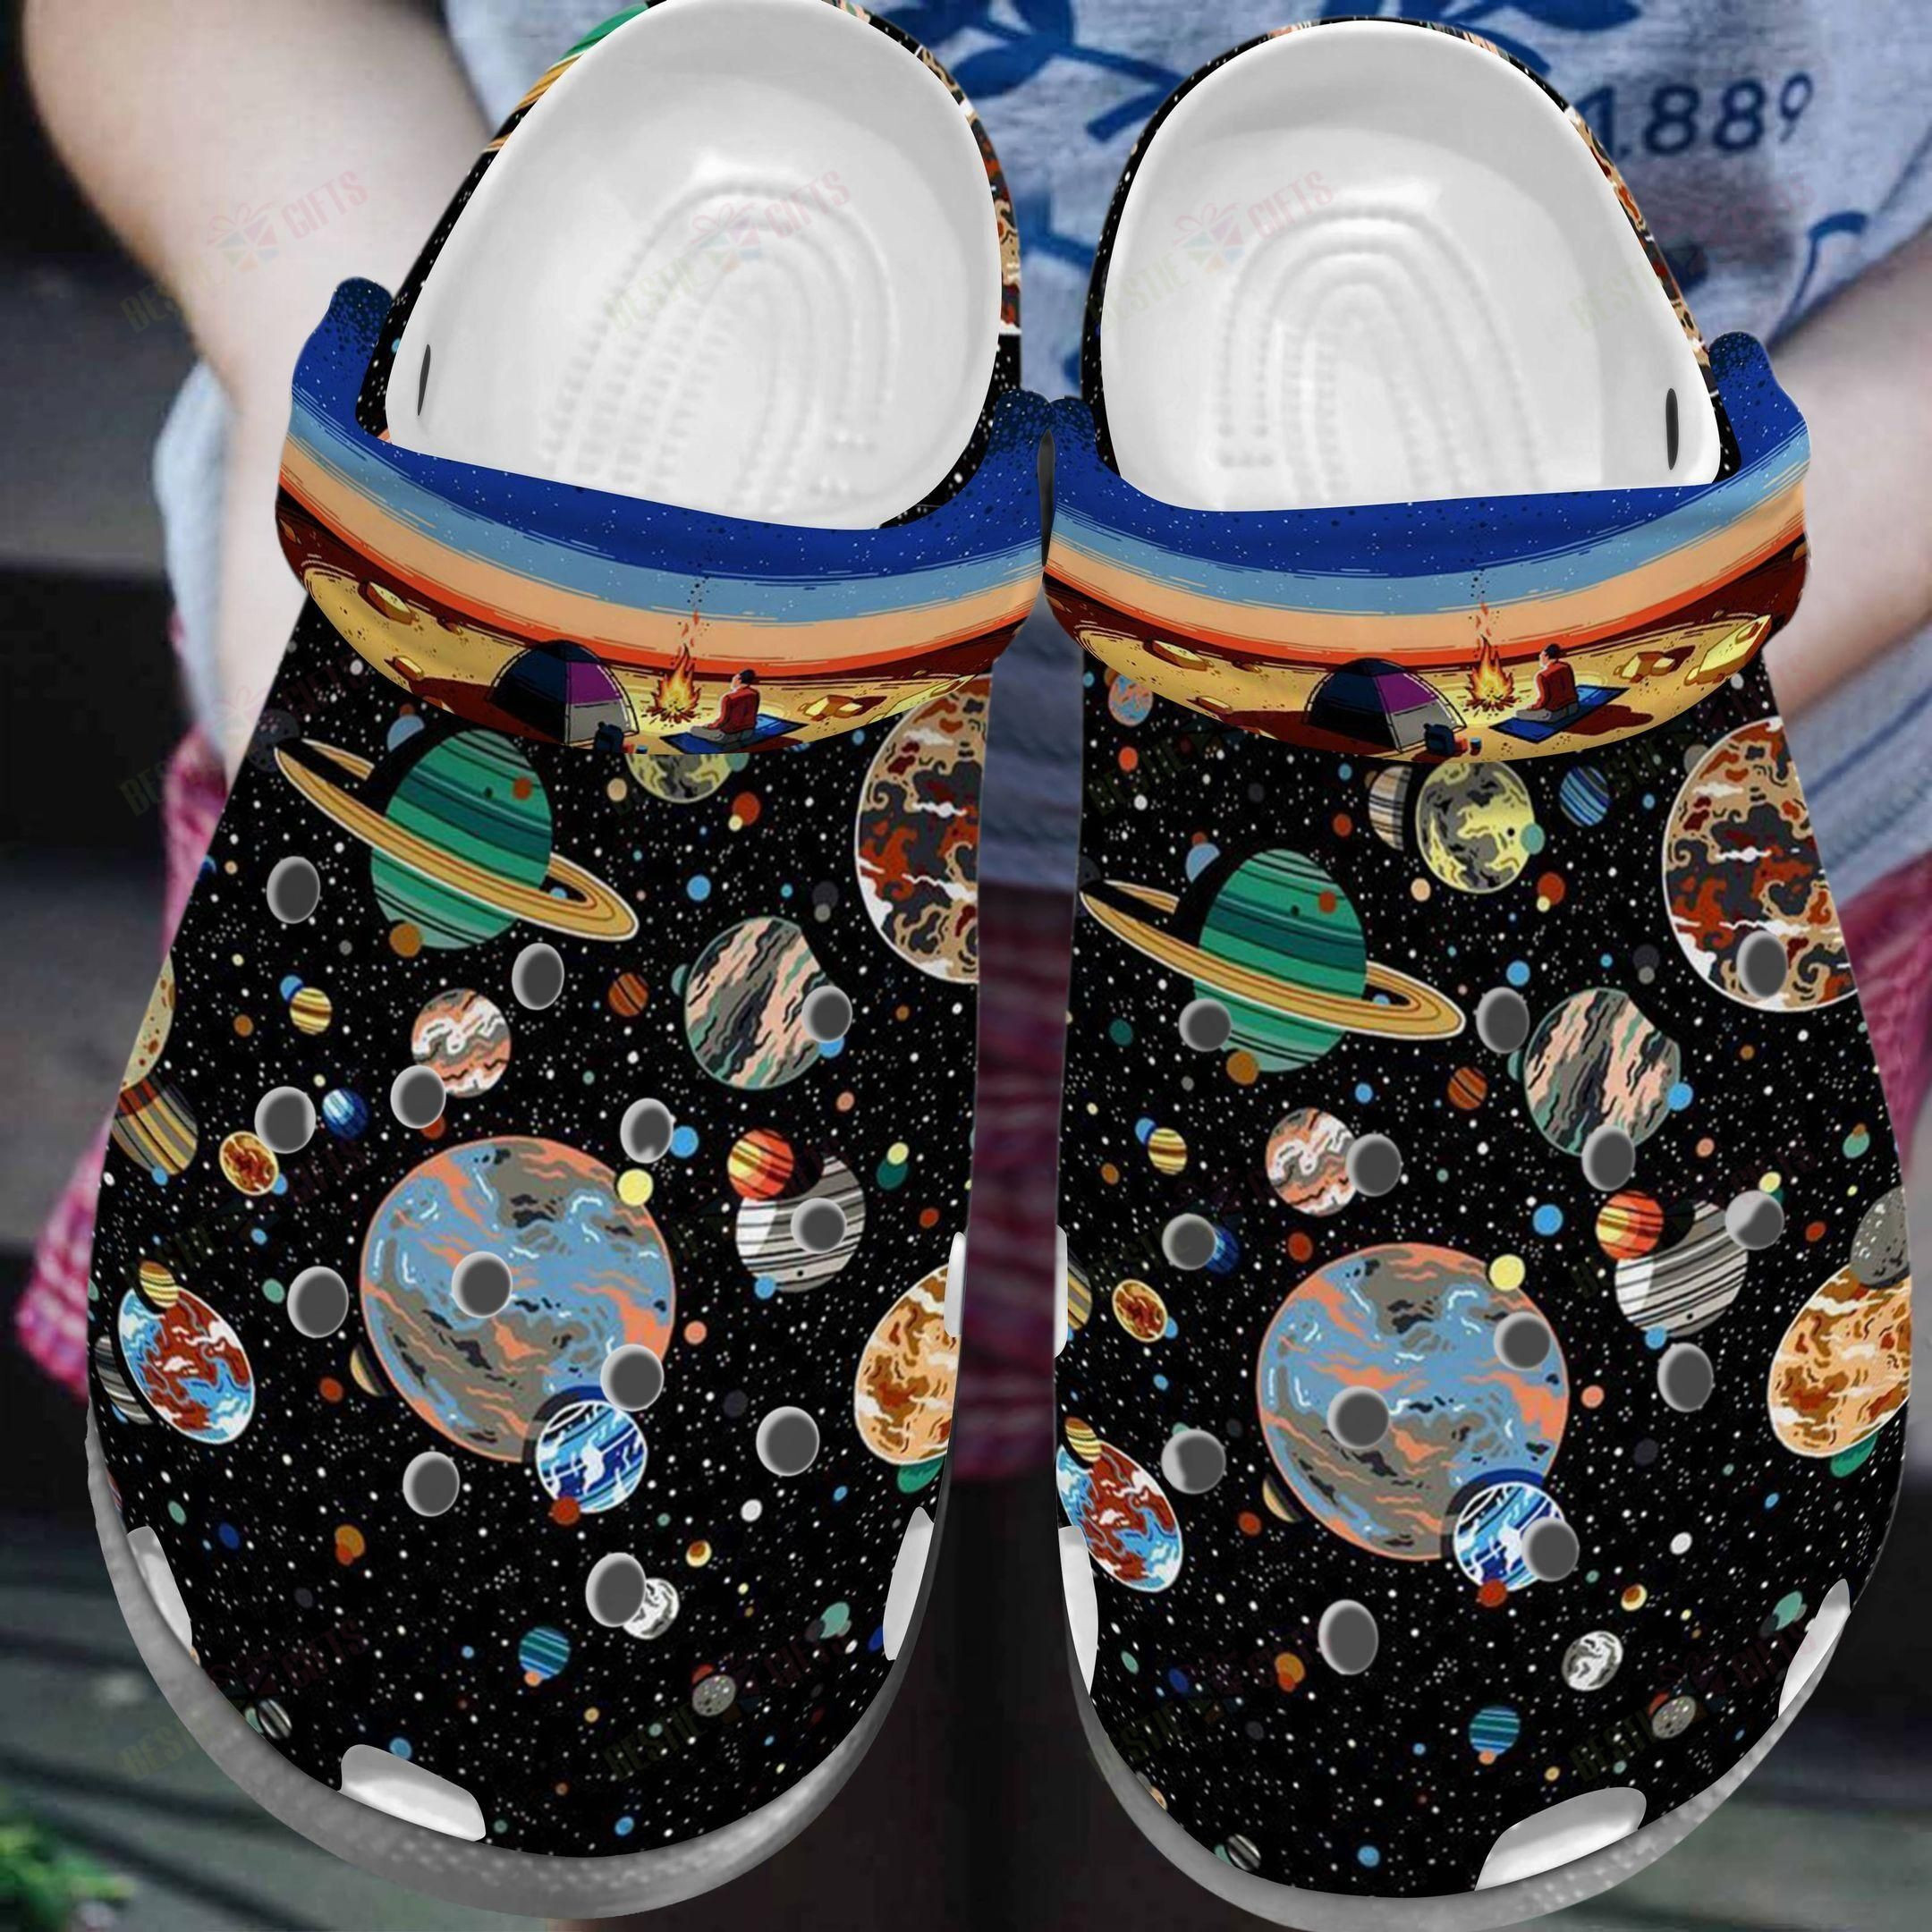 Astronaut Crocs Classic Clog Whitesole Camping On Mars Shoes